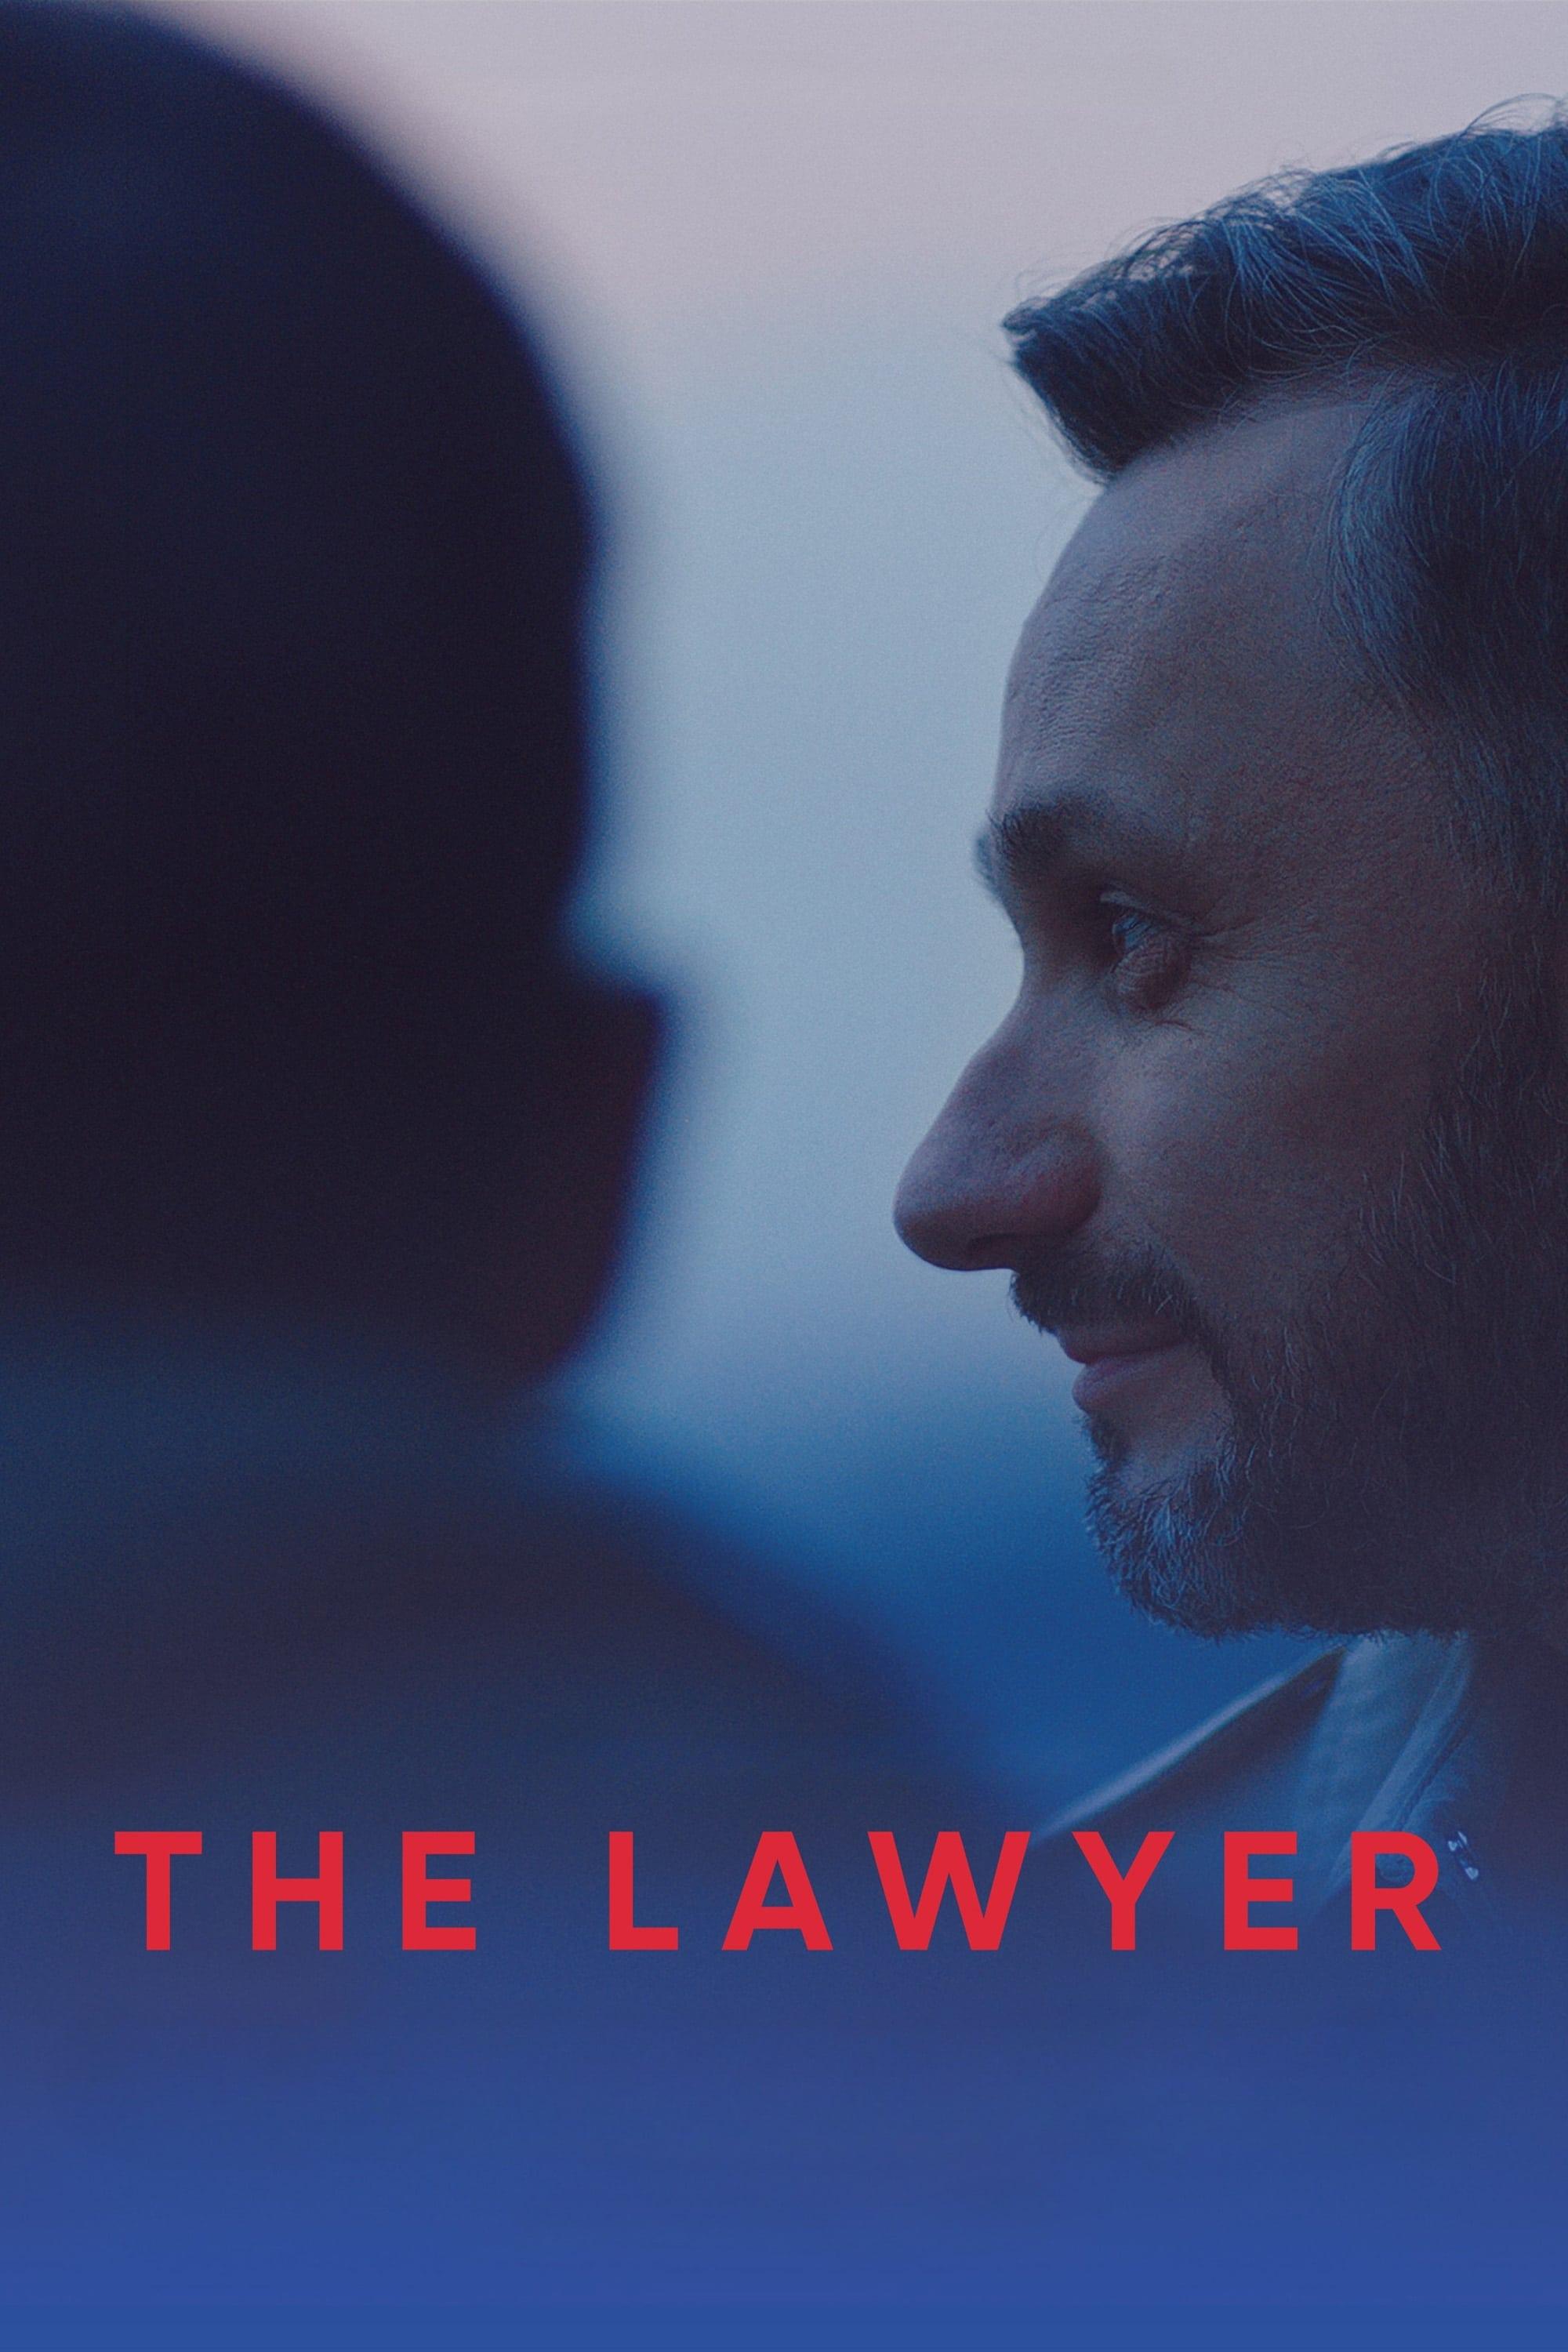 The Lawyer poster